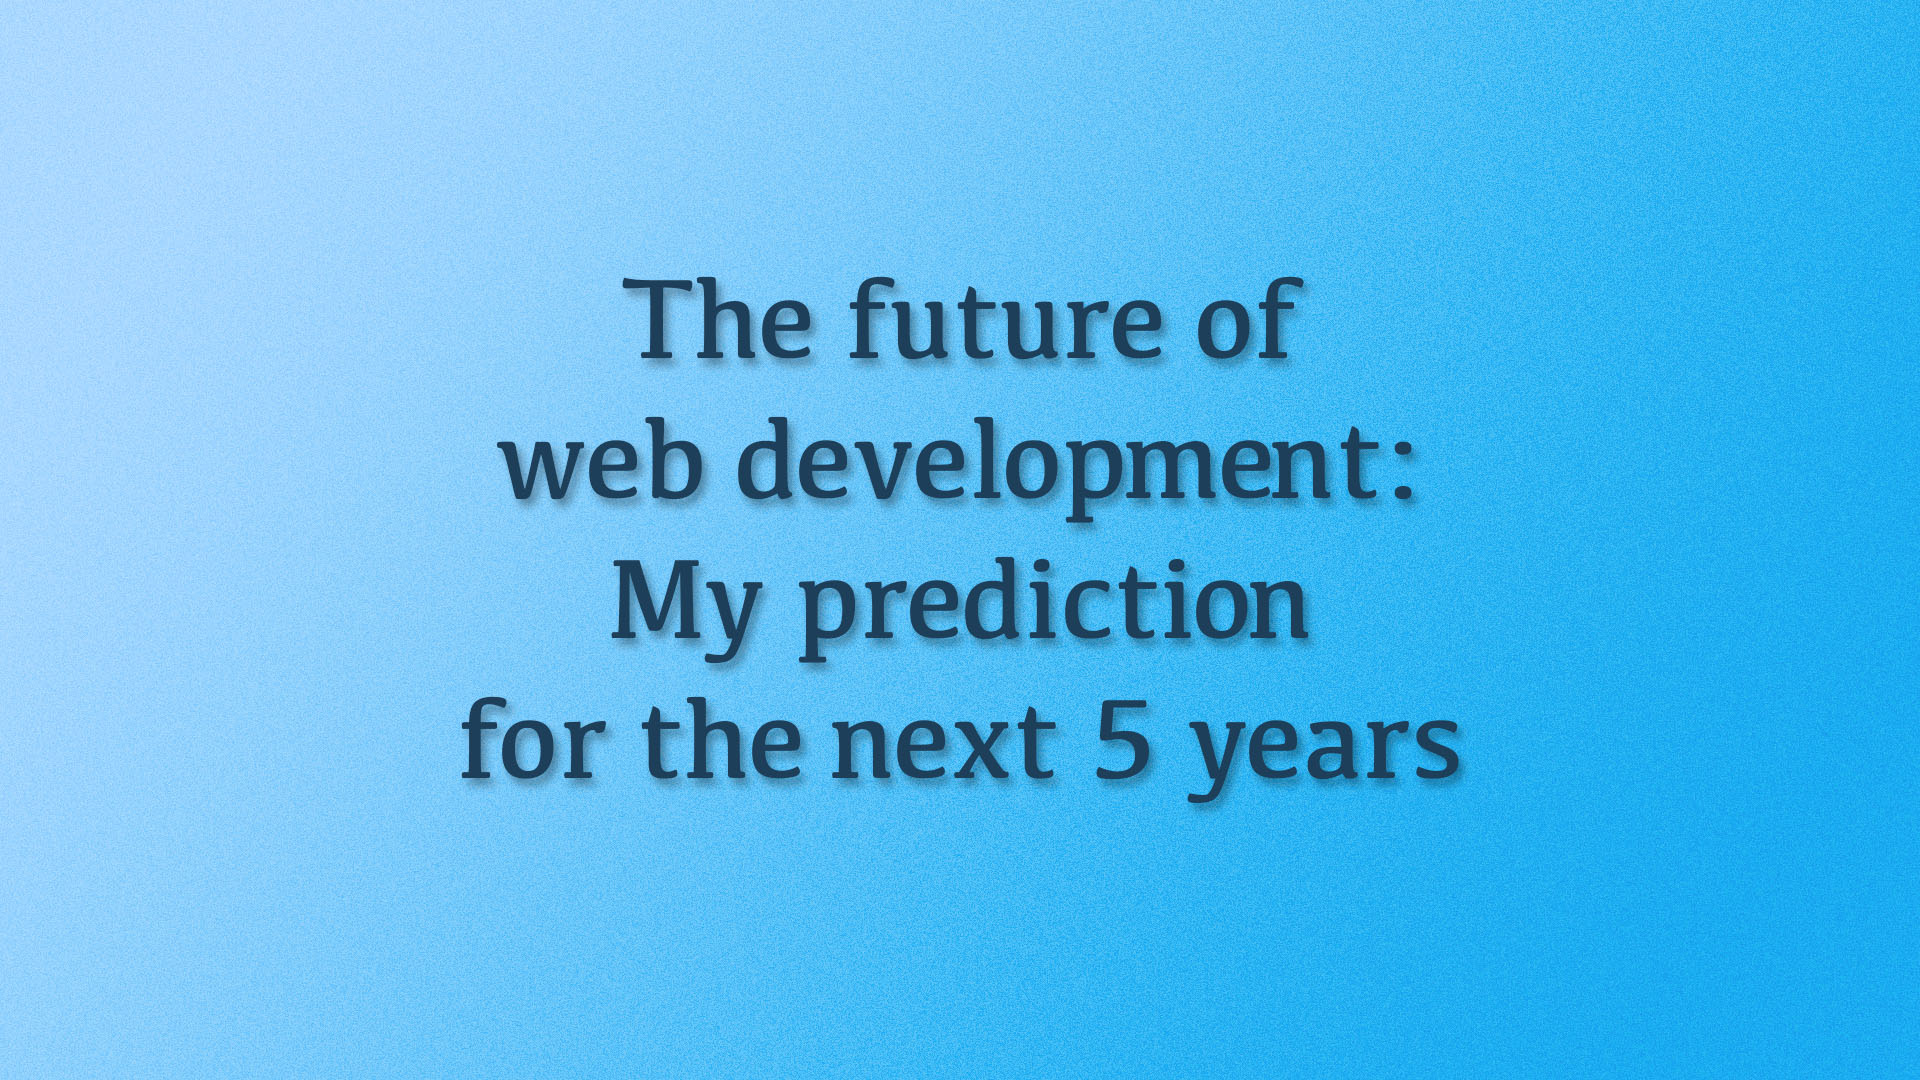 Thumbnail of The future of web development: My prediction for the next 5 years